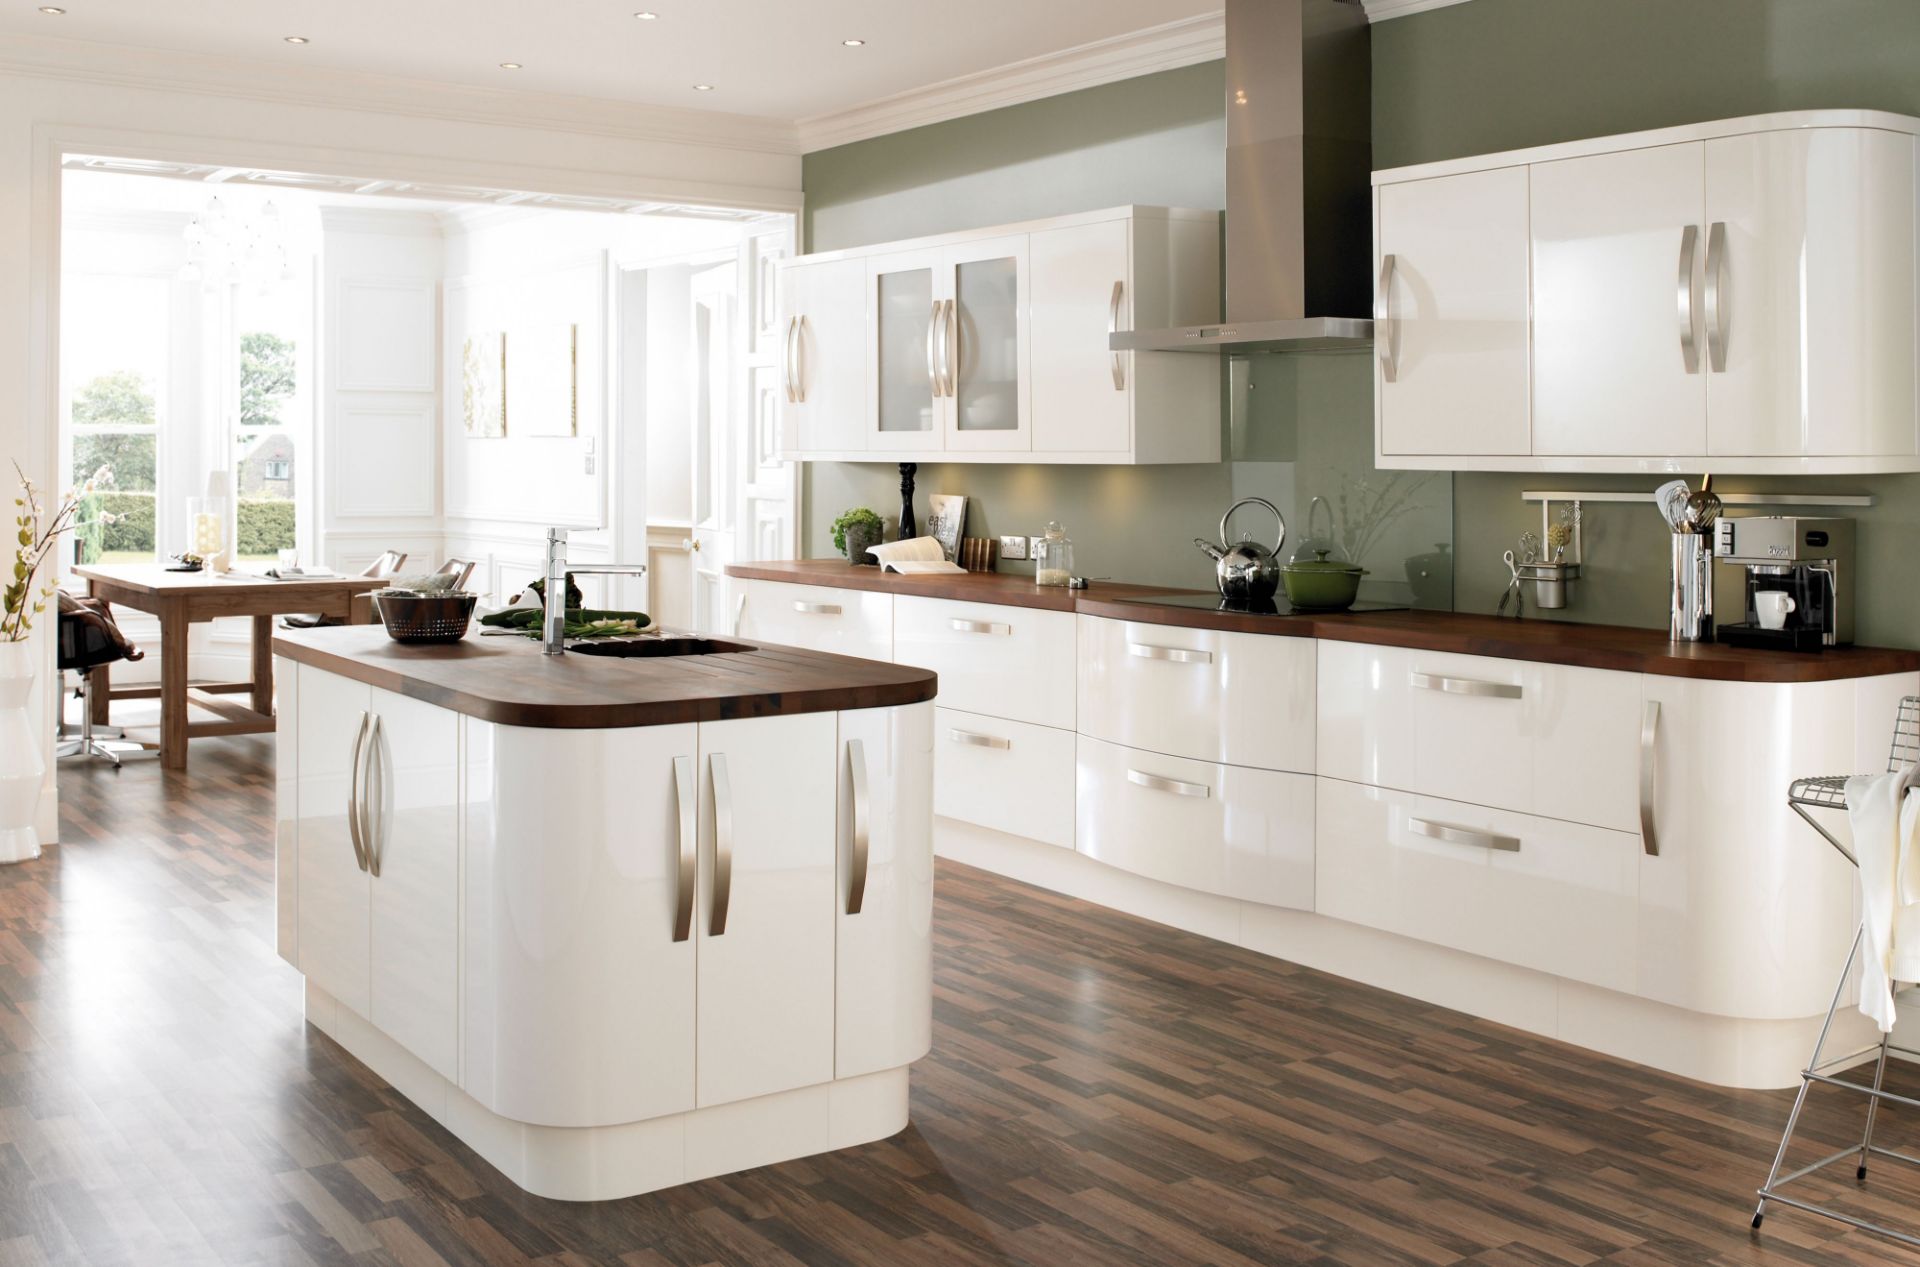 Circa 4,295 items of Kitchen Goods from the following ranges: Gloss White, Gloss Cream, Sandford - Image 3 of 15